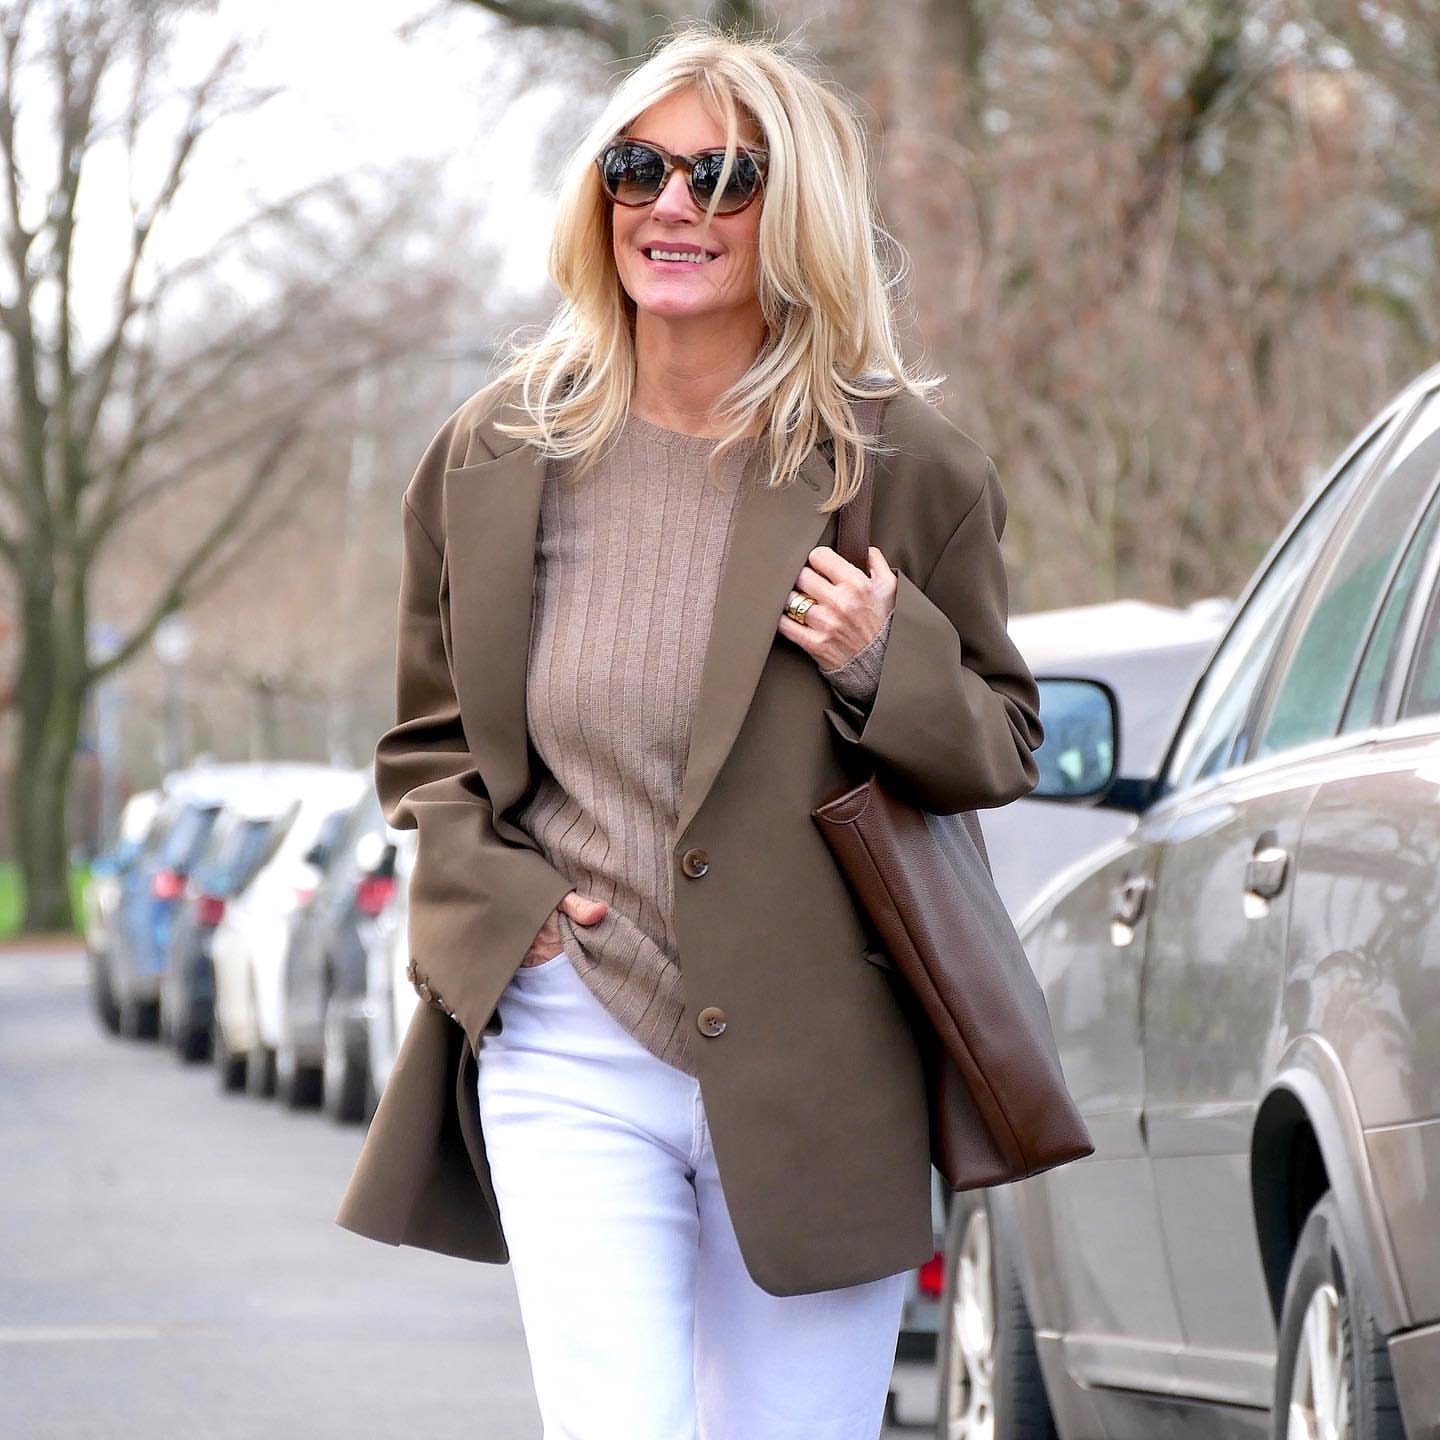 41 Stylish Outfit Ideas for Women Over 50 - Her Style Code